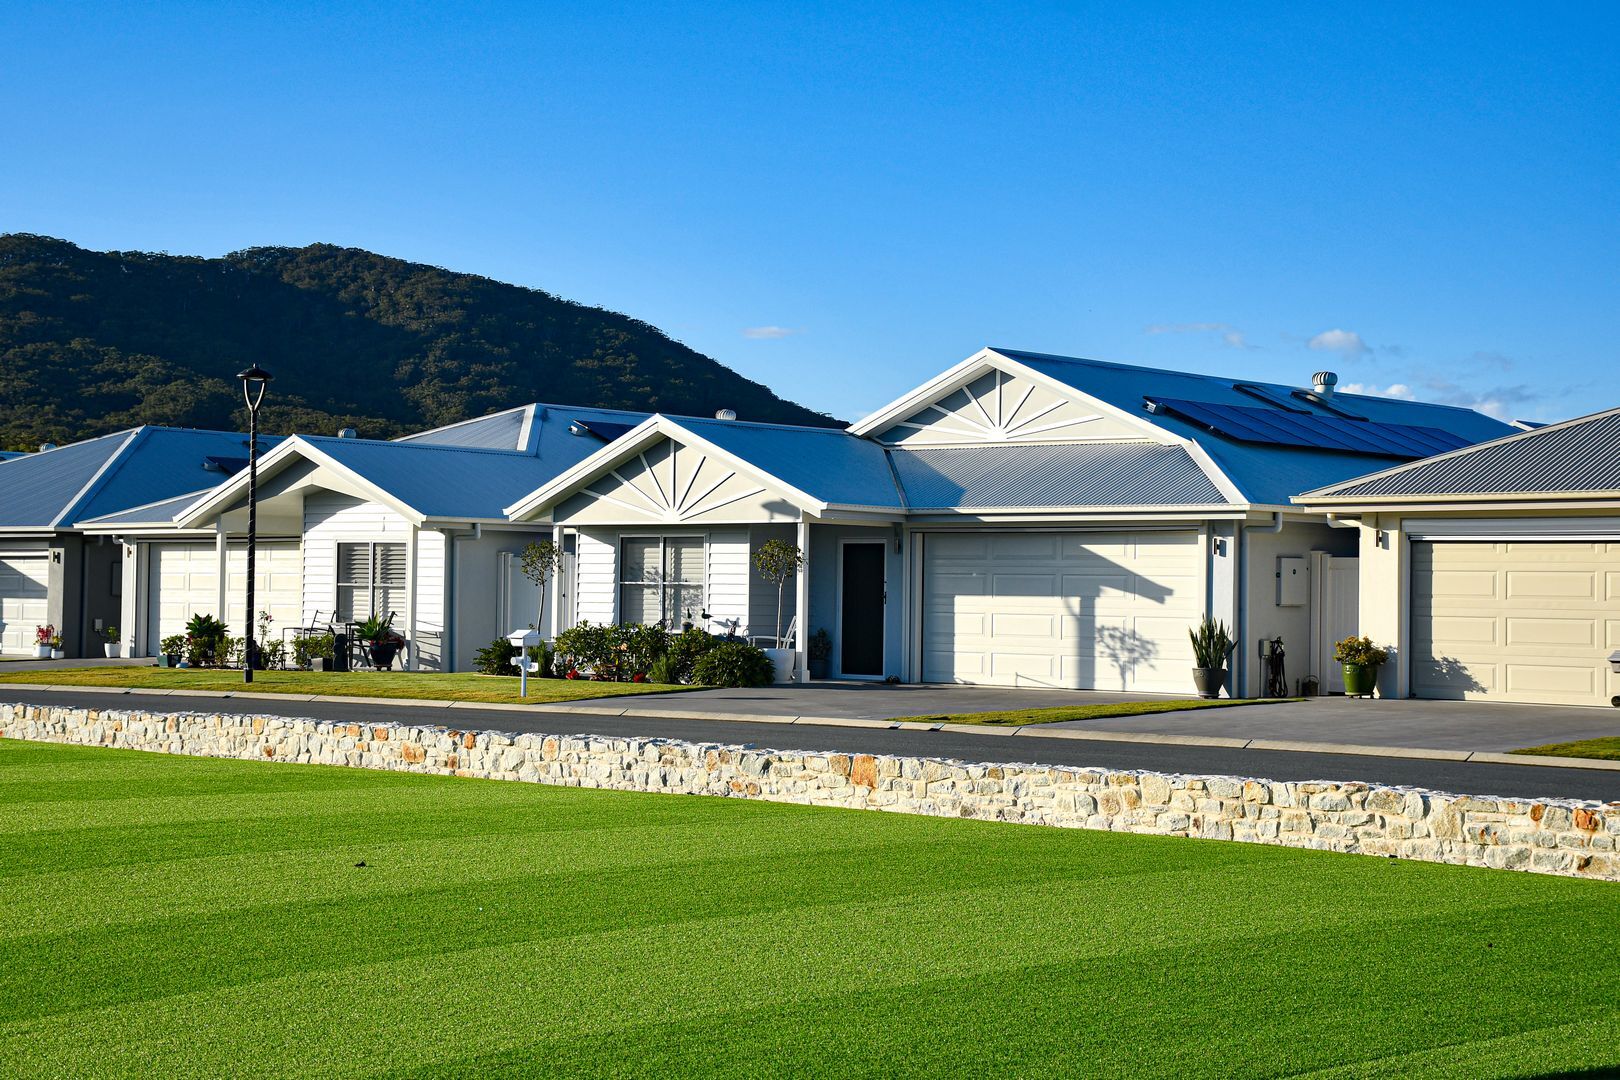 Lawn Houses for Over 50s